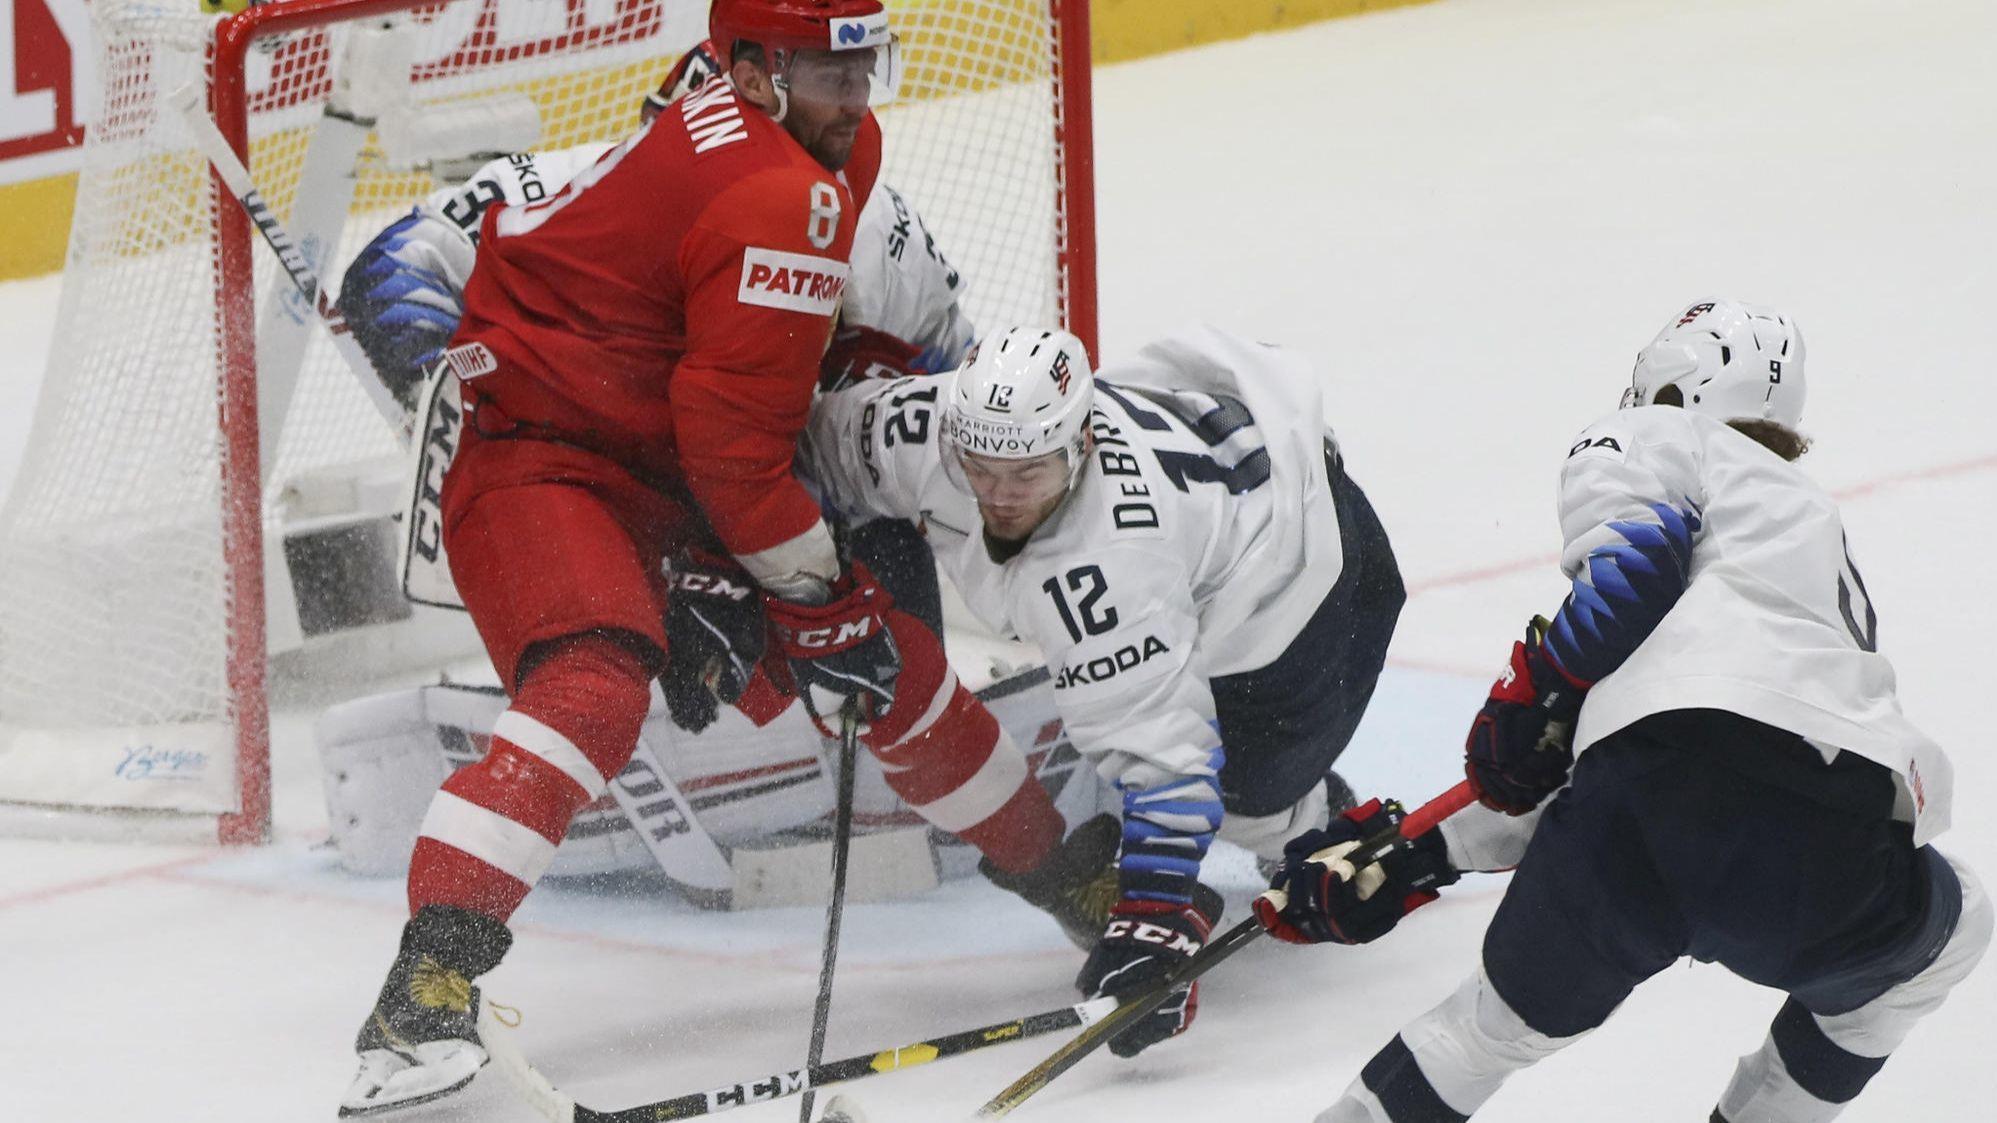 Alex DeBrincat's goal, Patrick Kane's 2 assists not enough as U.S. falls to Russia in world hockey championship semifinals